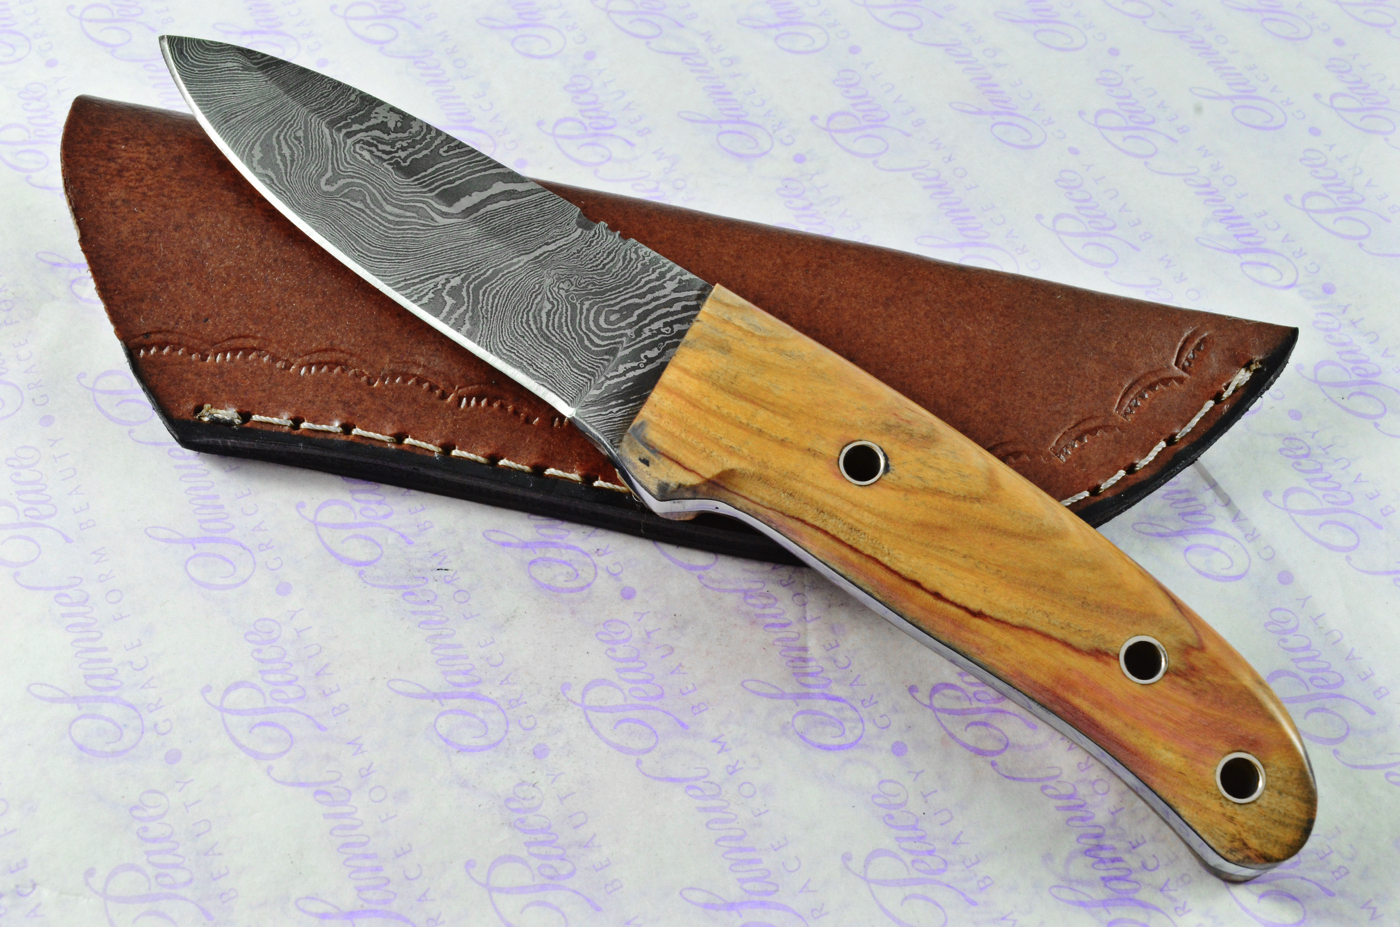 Astounding Damascus Steel Bushcraft Knife with Olive Wood Scales